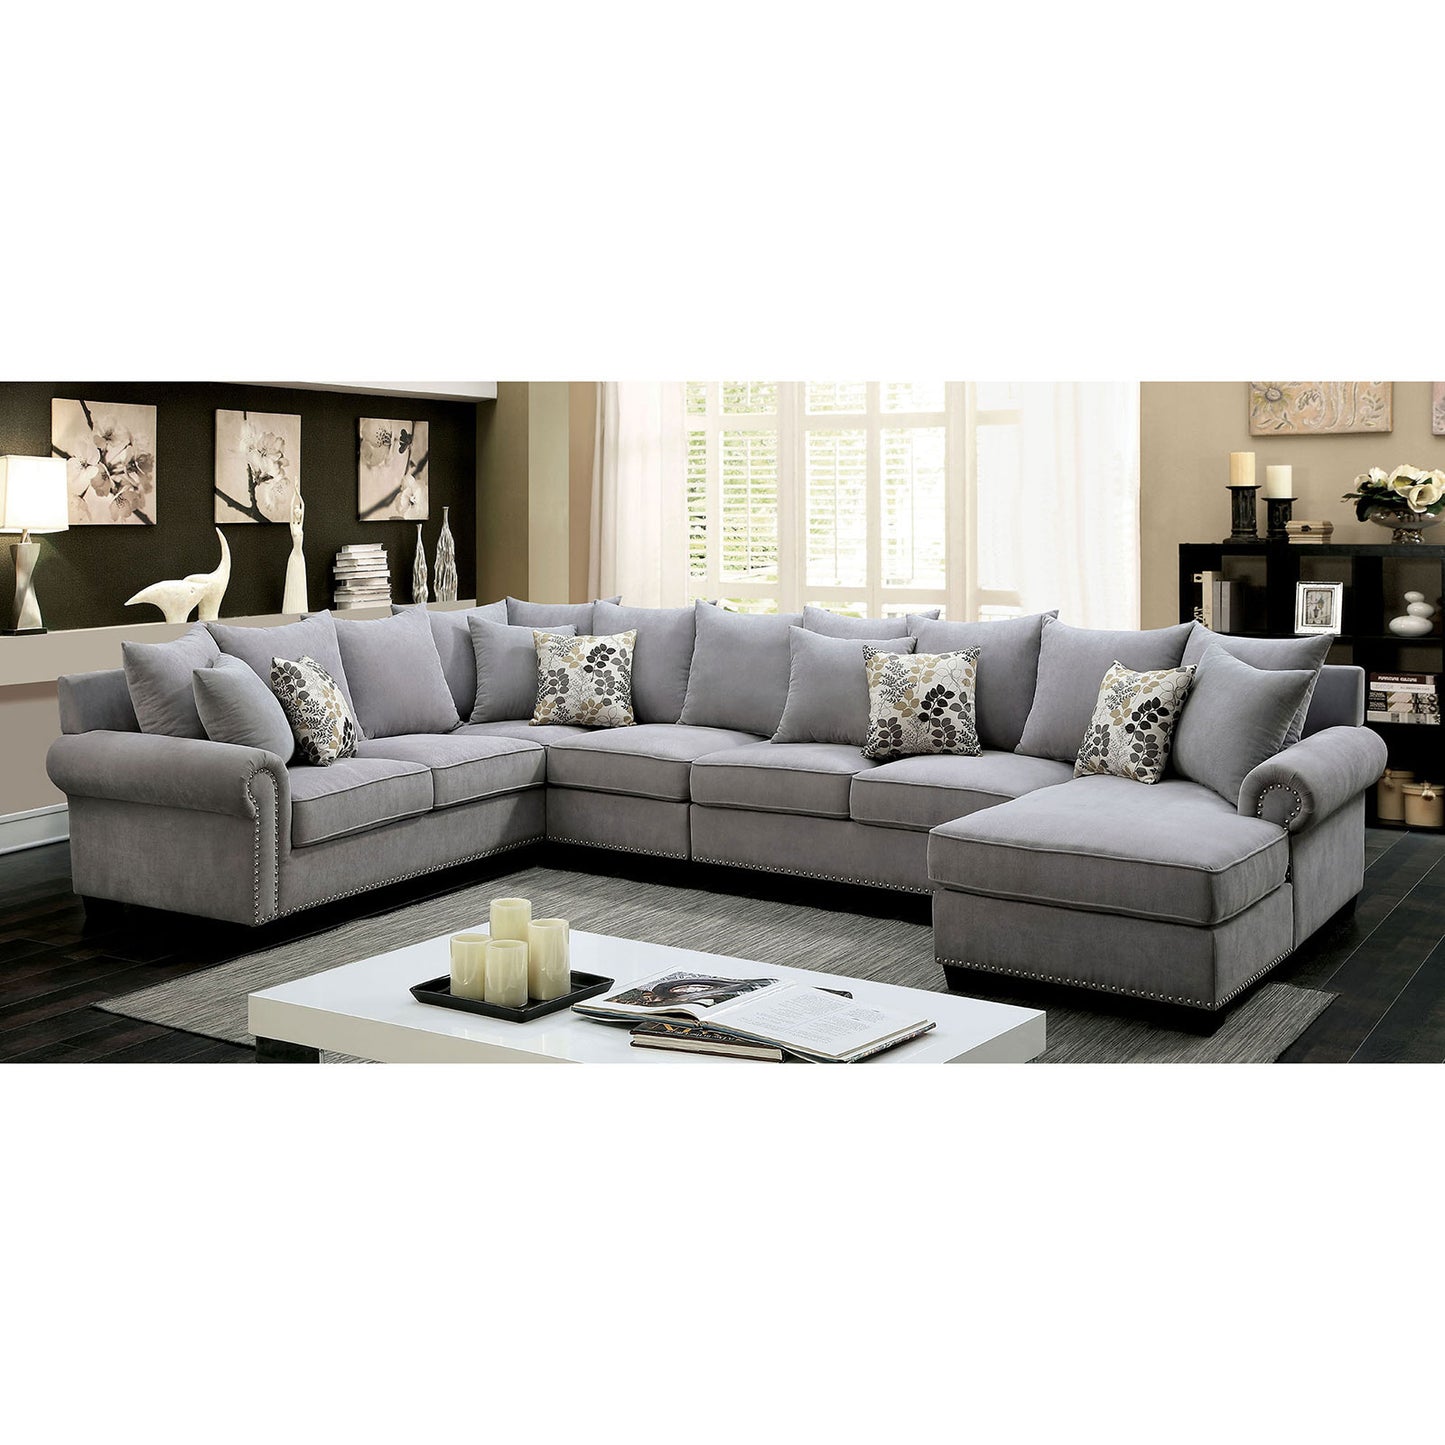 Furniture of America SKYLER II Gray Sectional + Chair, Gray